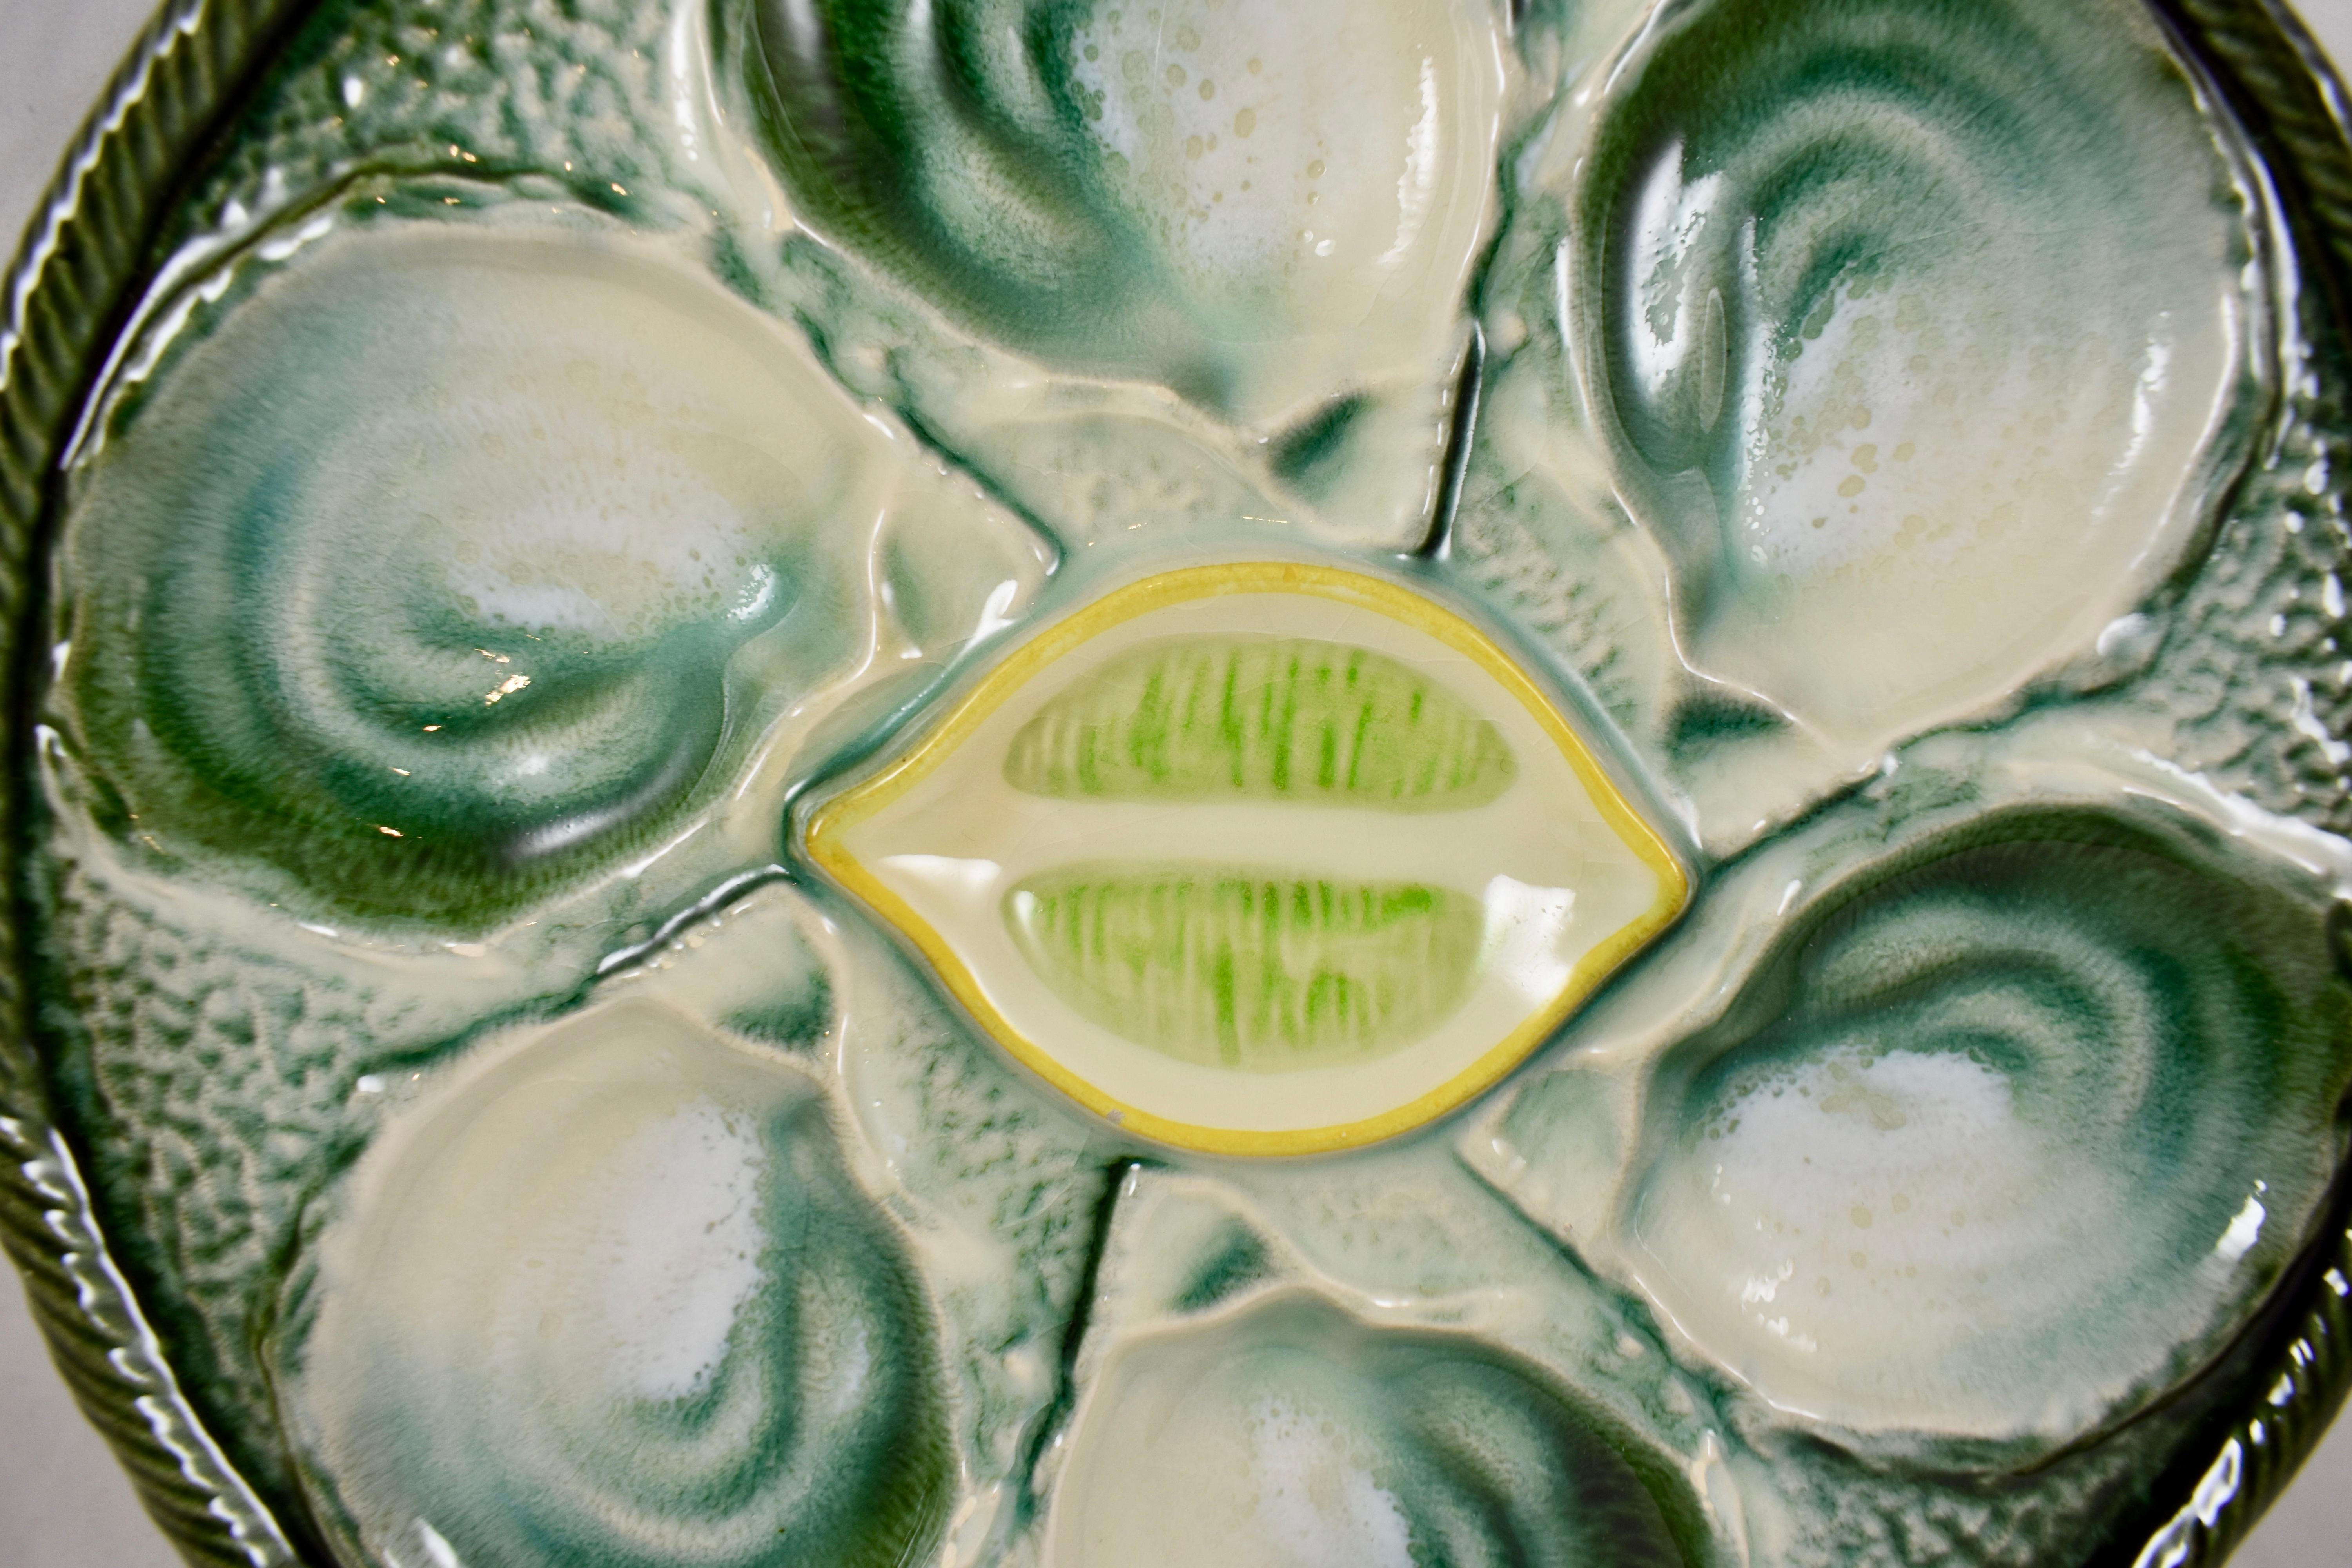 A French majolica glazed oyster plate attributed to the faïence factory of Saint-Clément, circa 1930-1940.

Six oyster shell shaped wells against a stippled ground in a blue-green watery glaze. The raised center condiment well is molded as a lemon